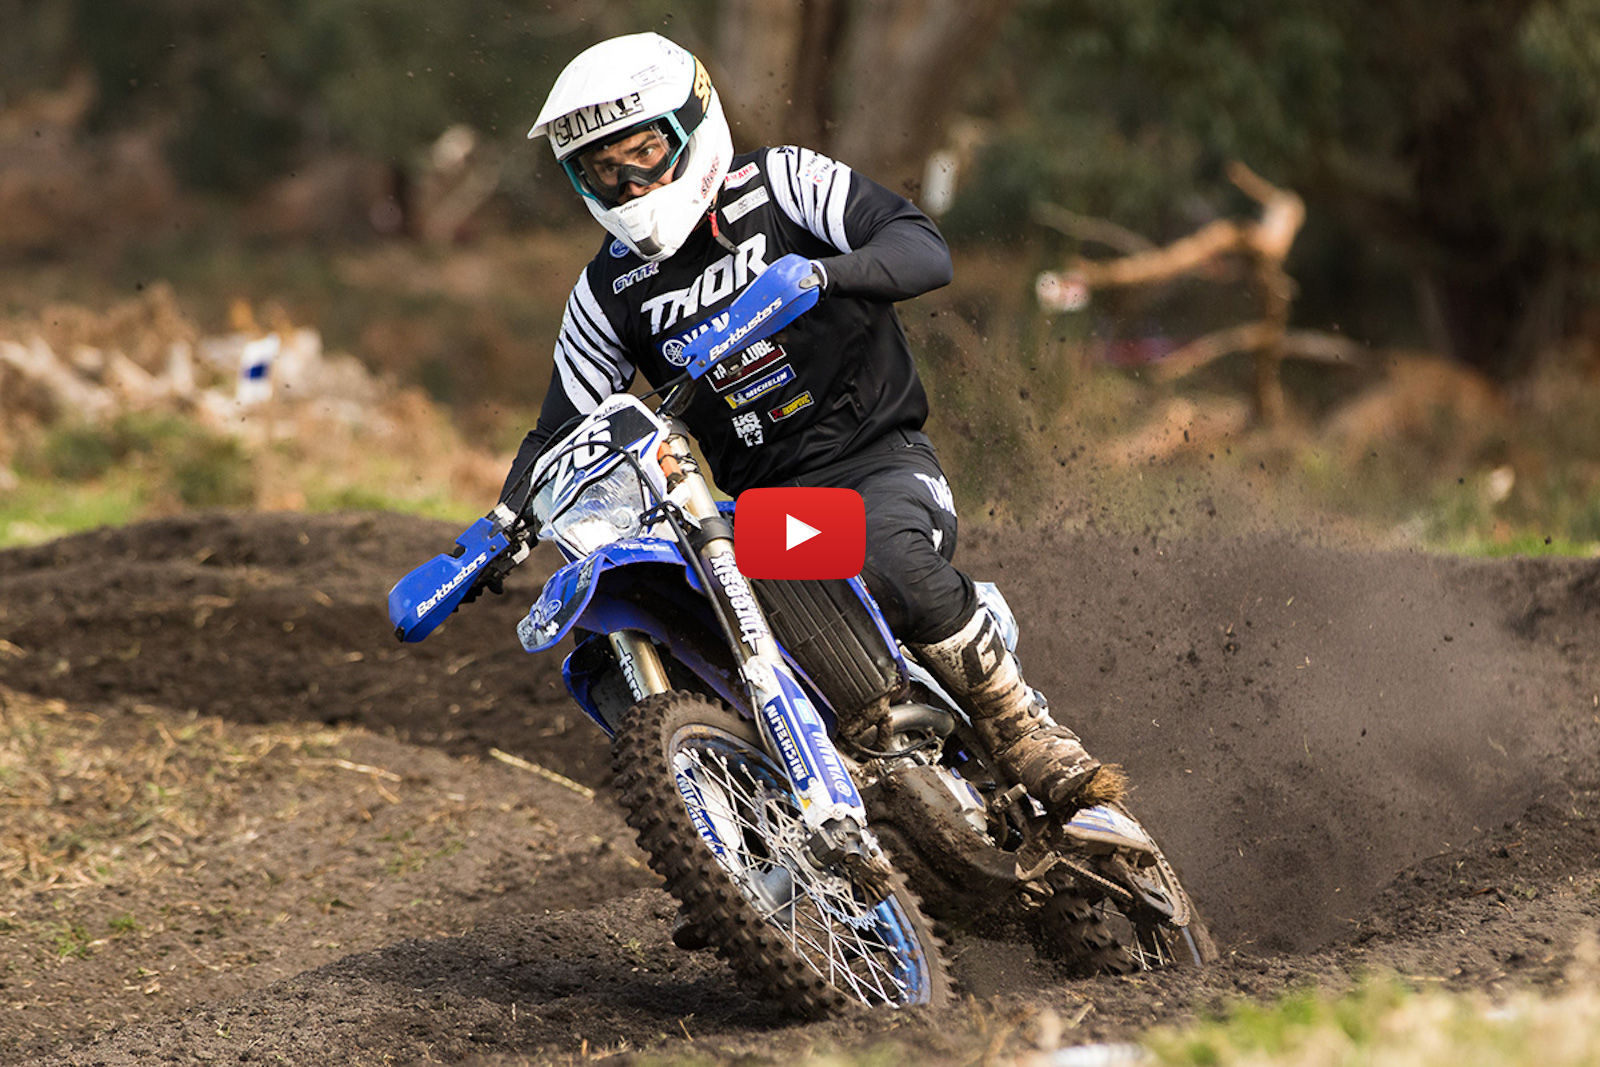 2019 AORC season wrapped-up – Styke, Milner, Bacon and Gardiner crowned champions